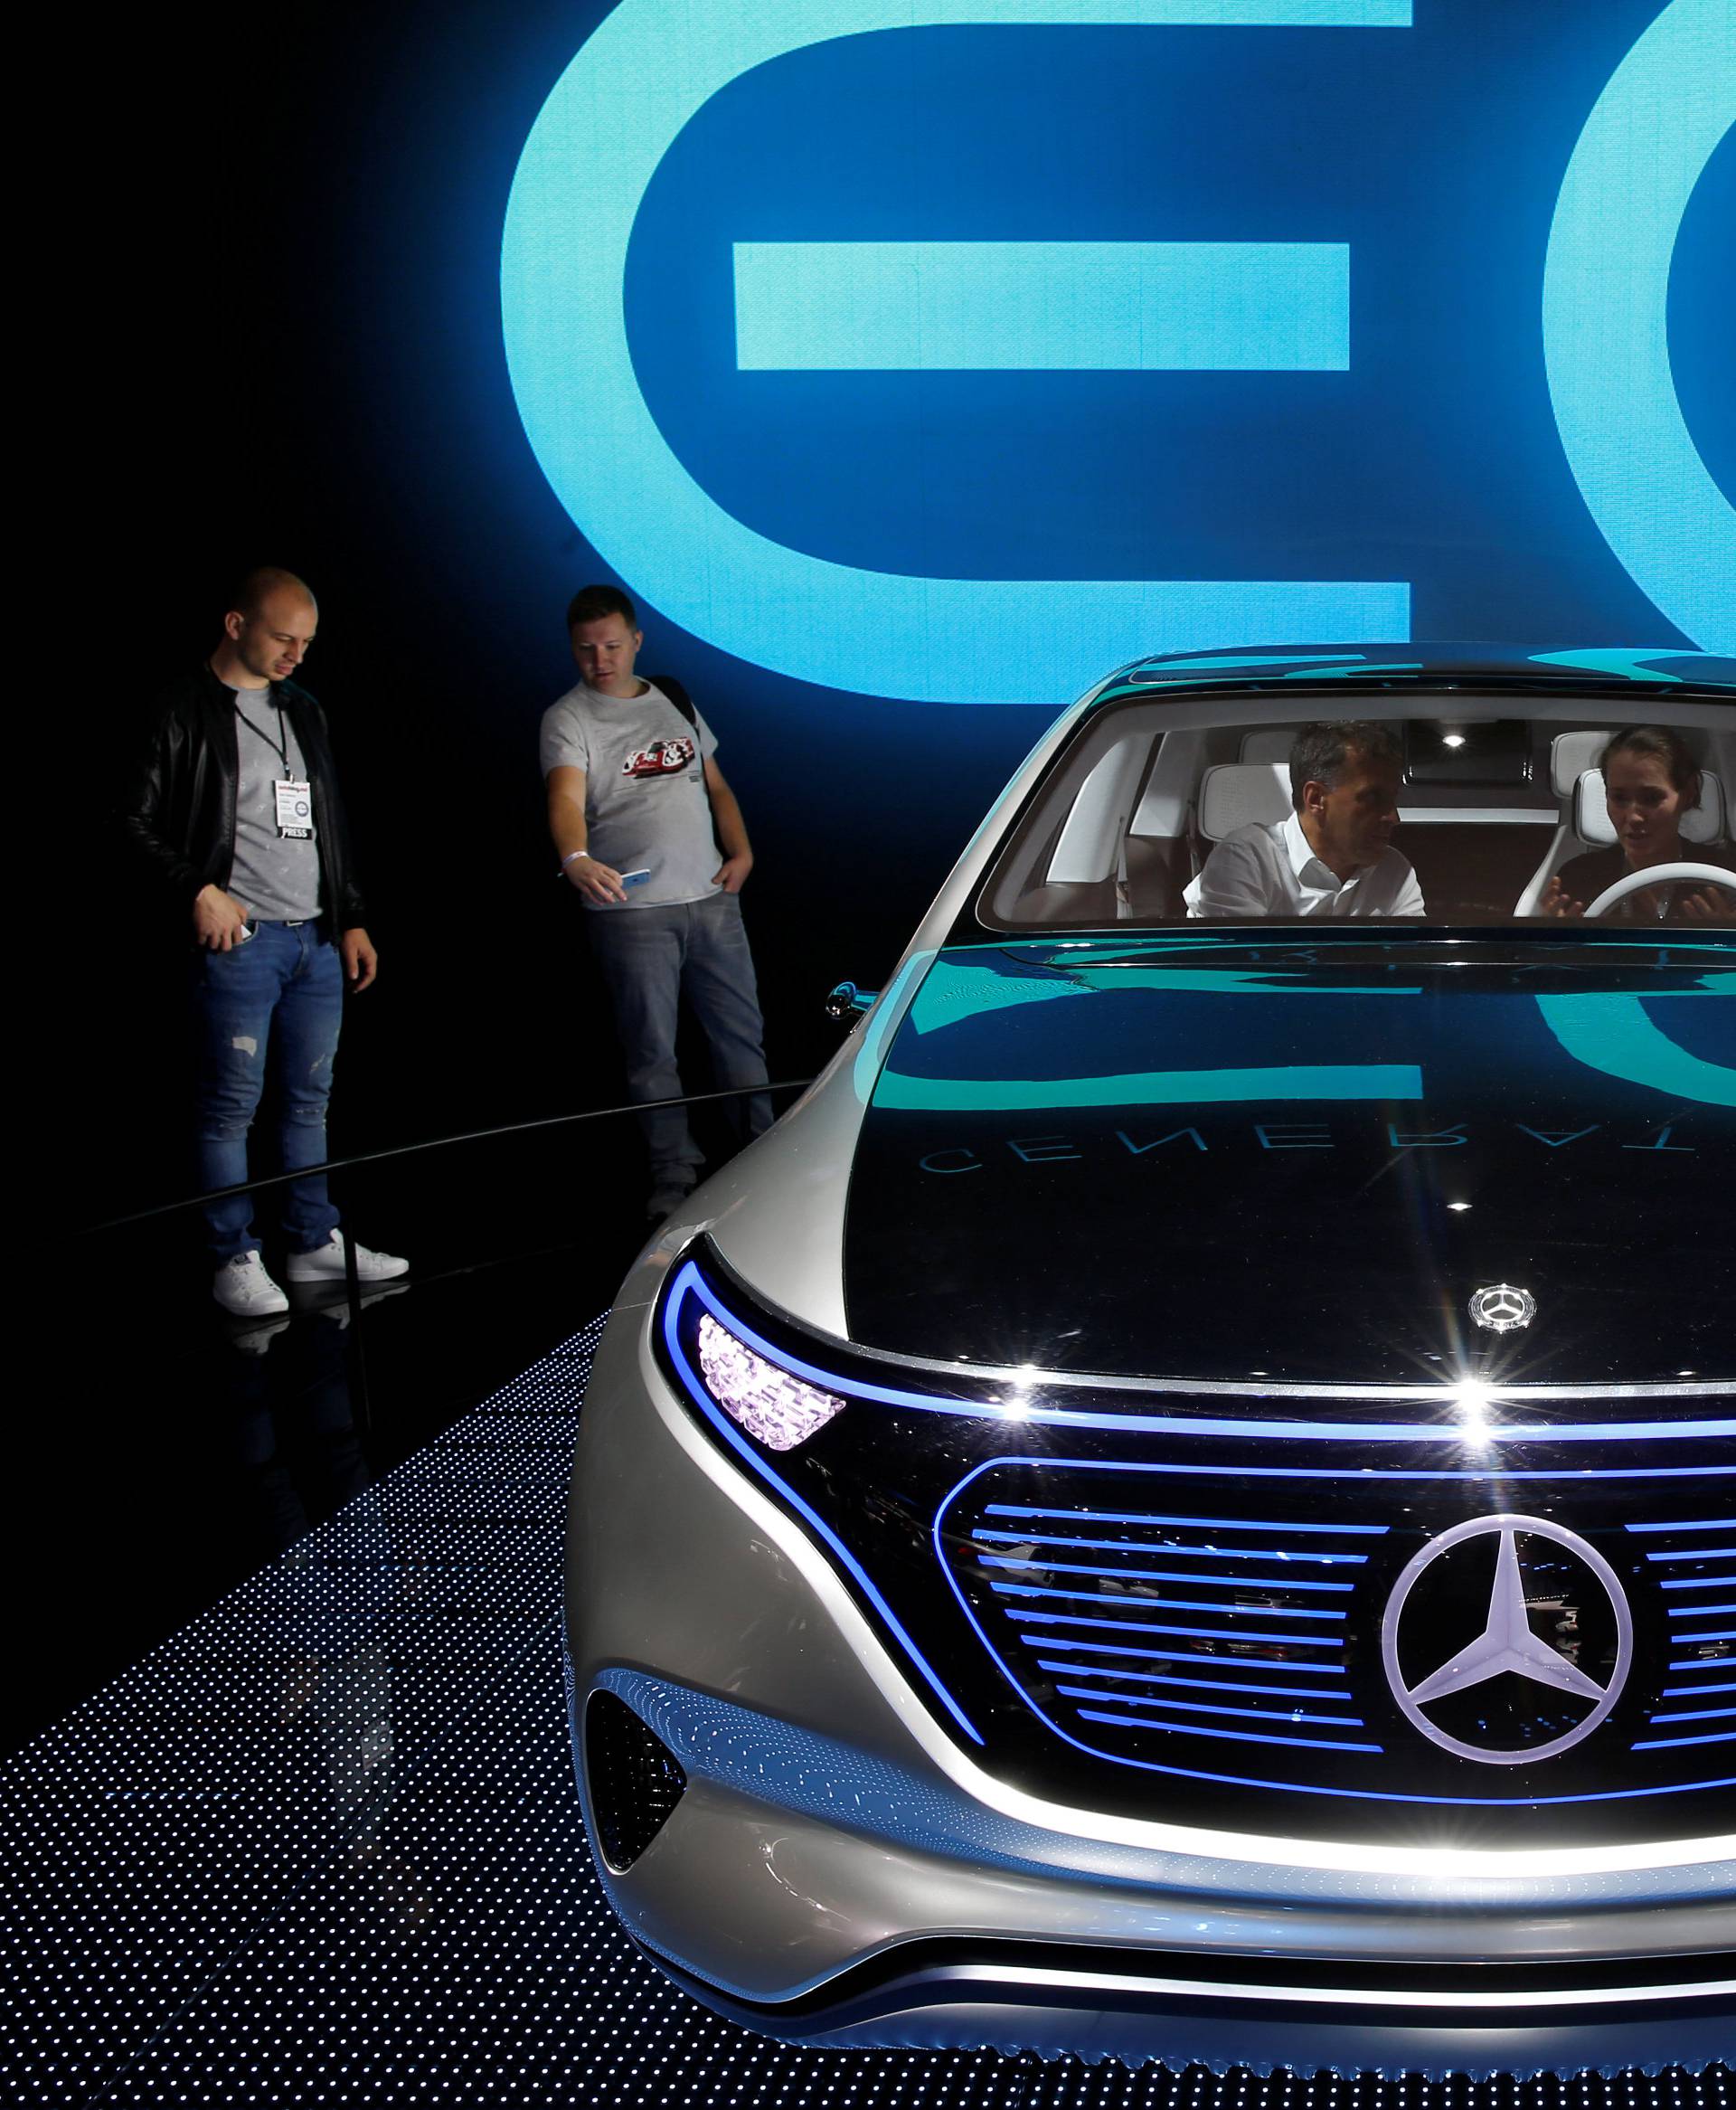 The Mercedes EQ concept car is displayed on media day at the Paris auto show, in Paris